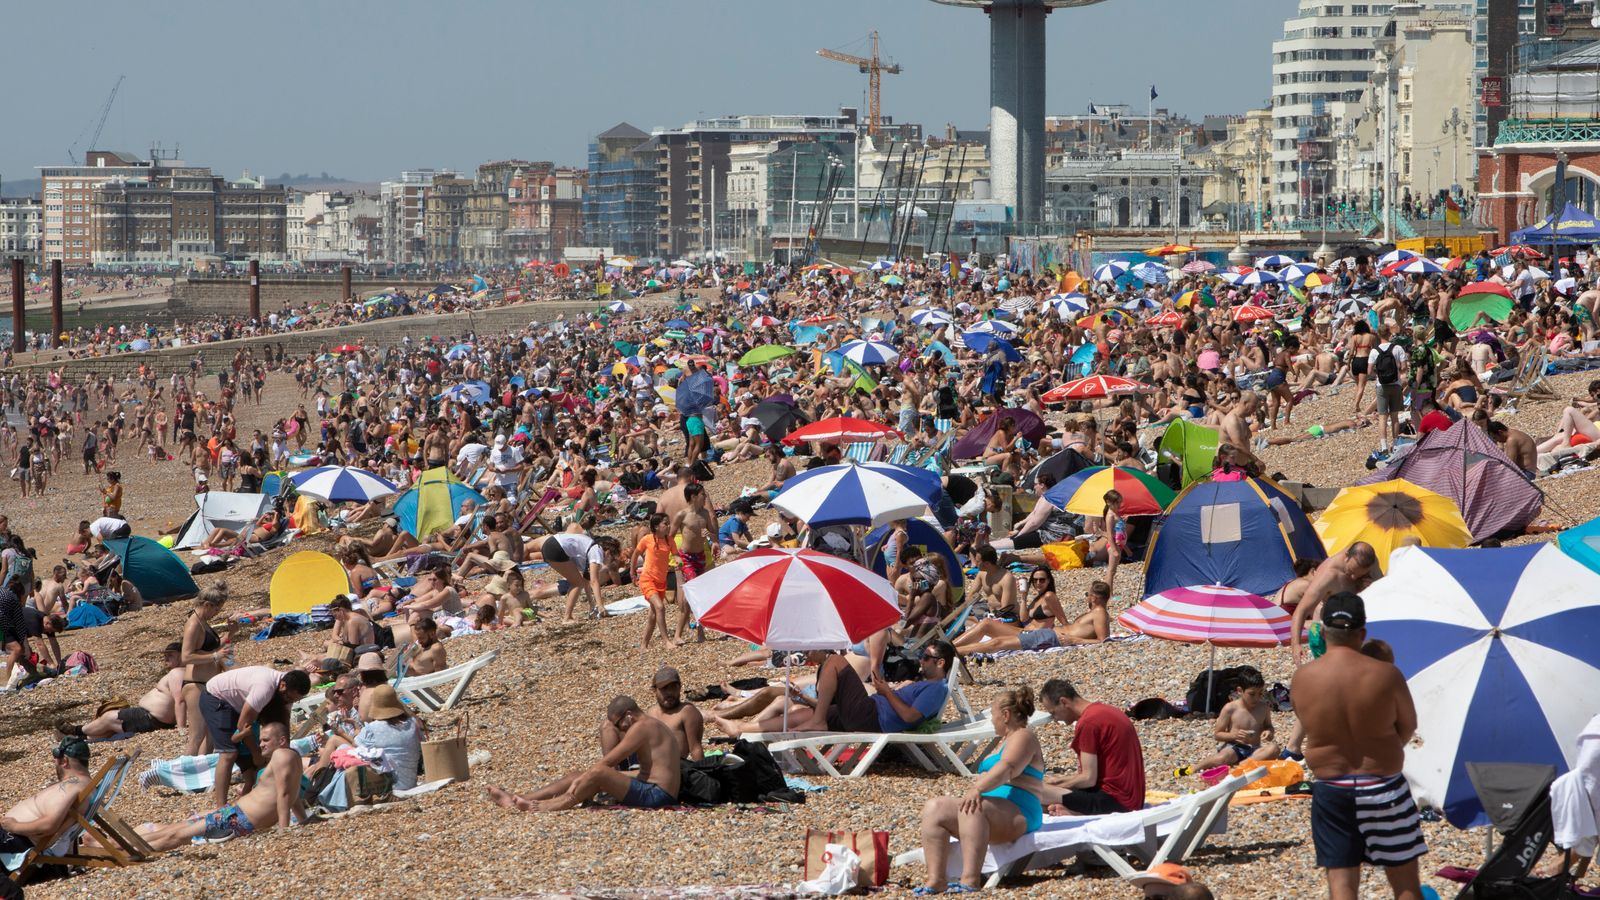 Brighton beach was packed despite as people enjoyed the hot weather